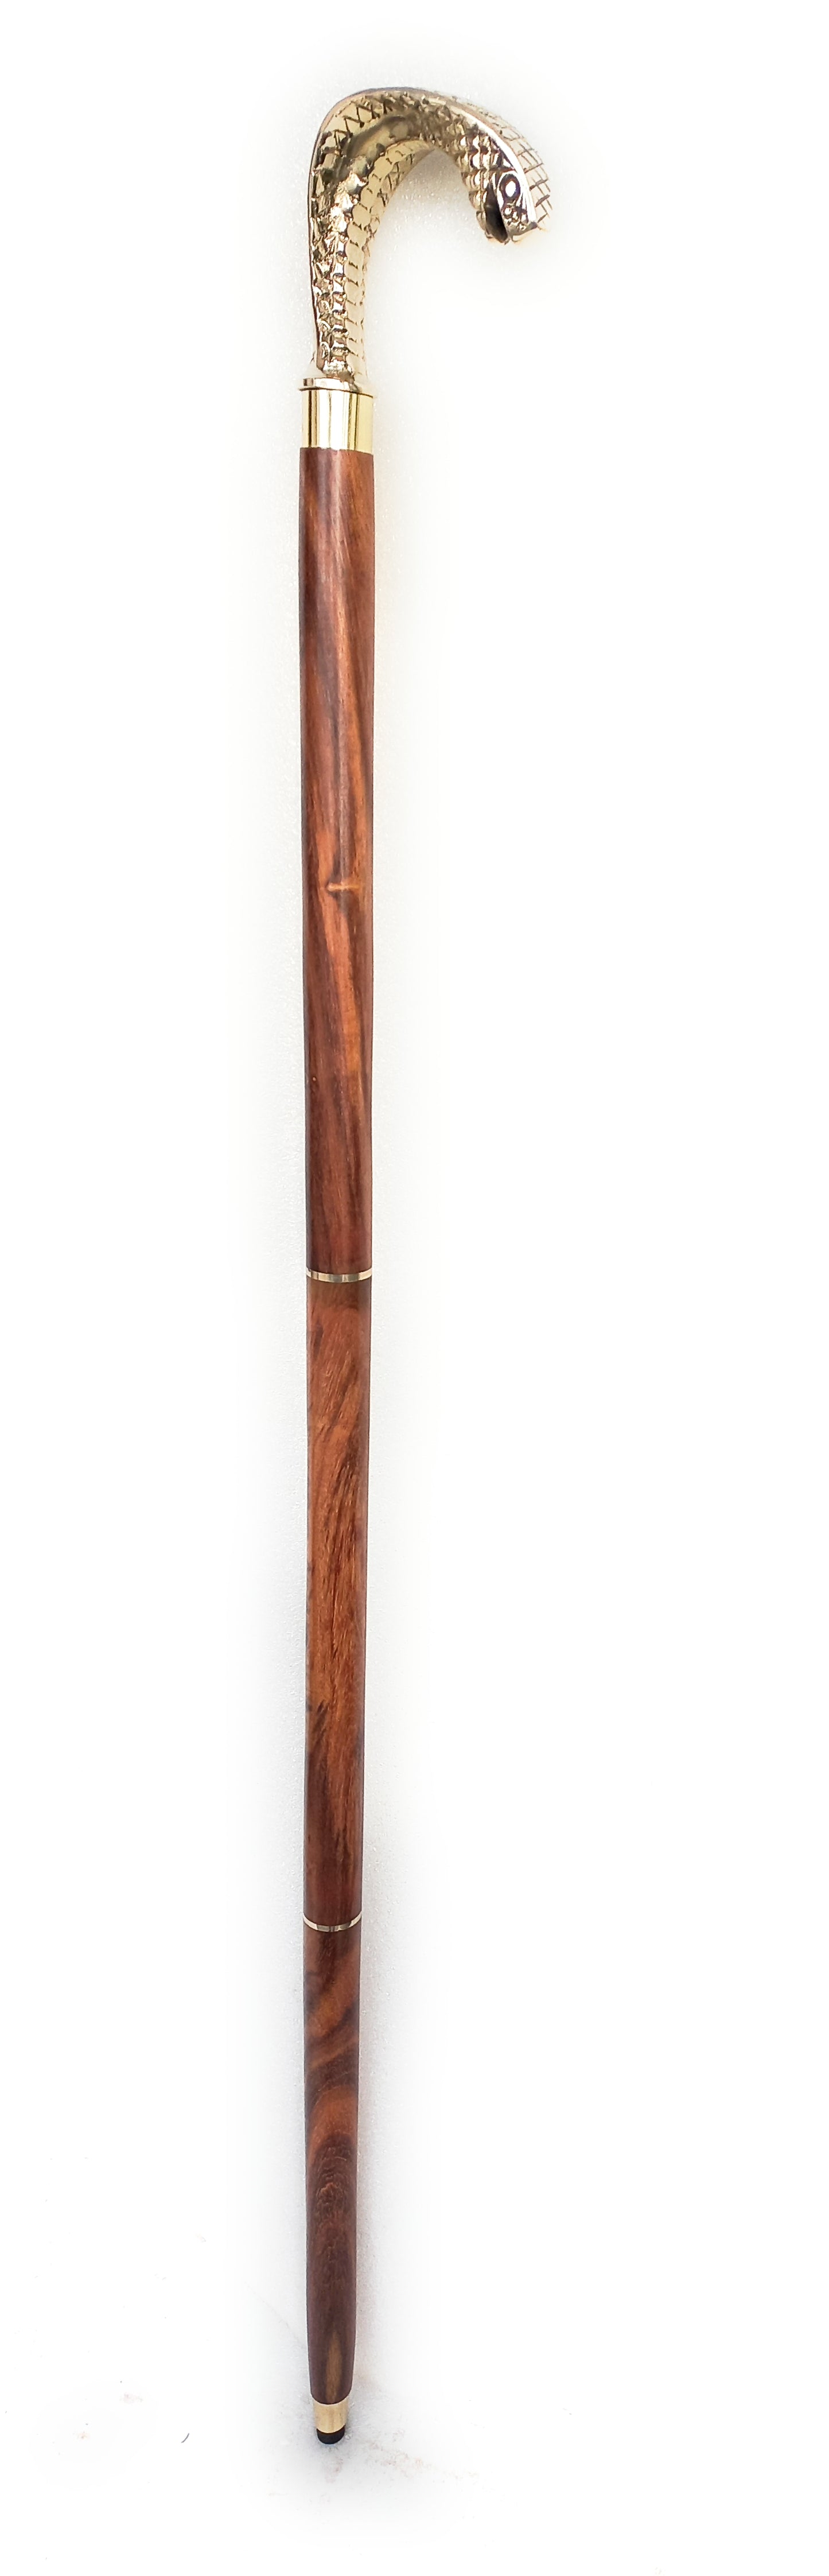 Exclusive Cobra Personalized Walking Stick, Brass Handle Cane